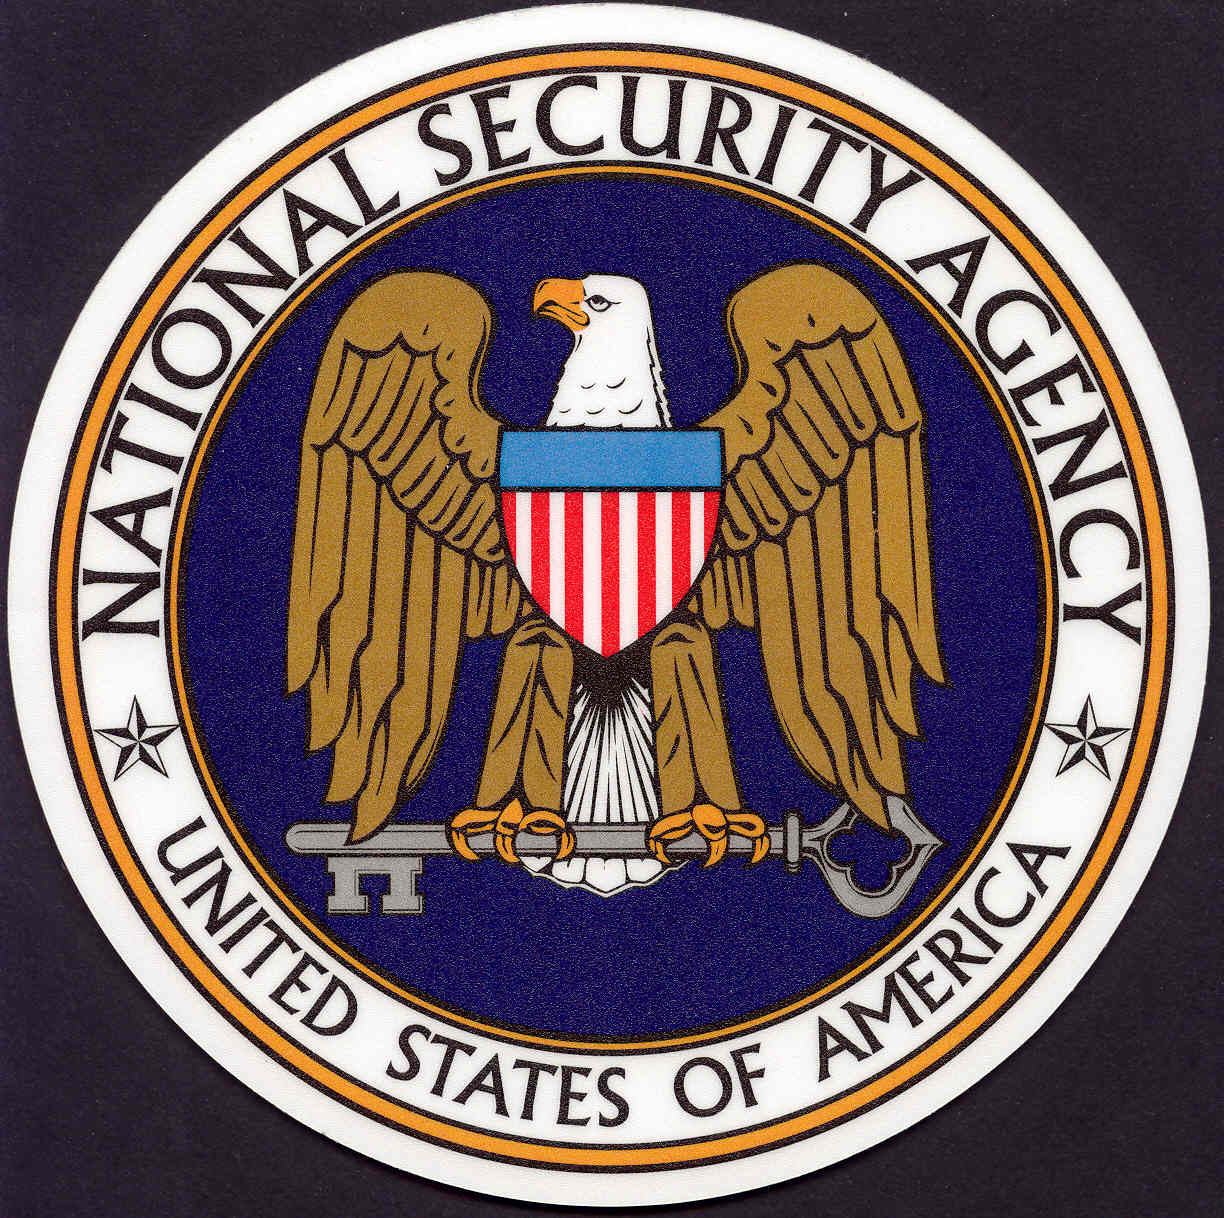 NSA Logo - NSA Logo | National Security Agency | #4 Free HD Wallpapers, Images ...